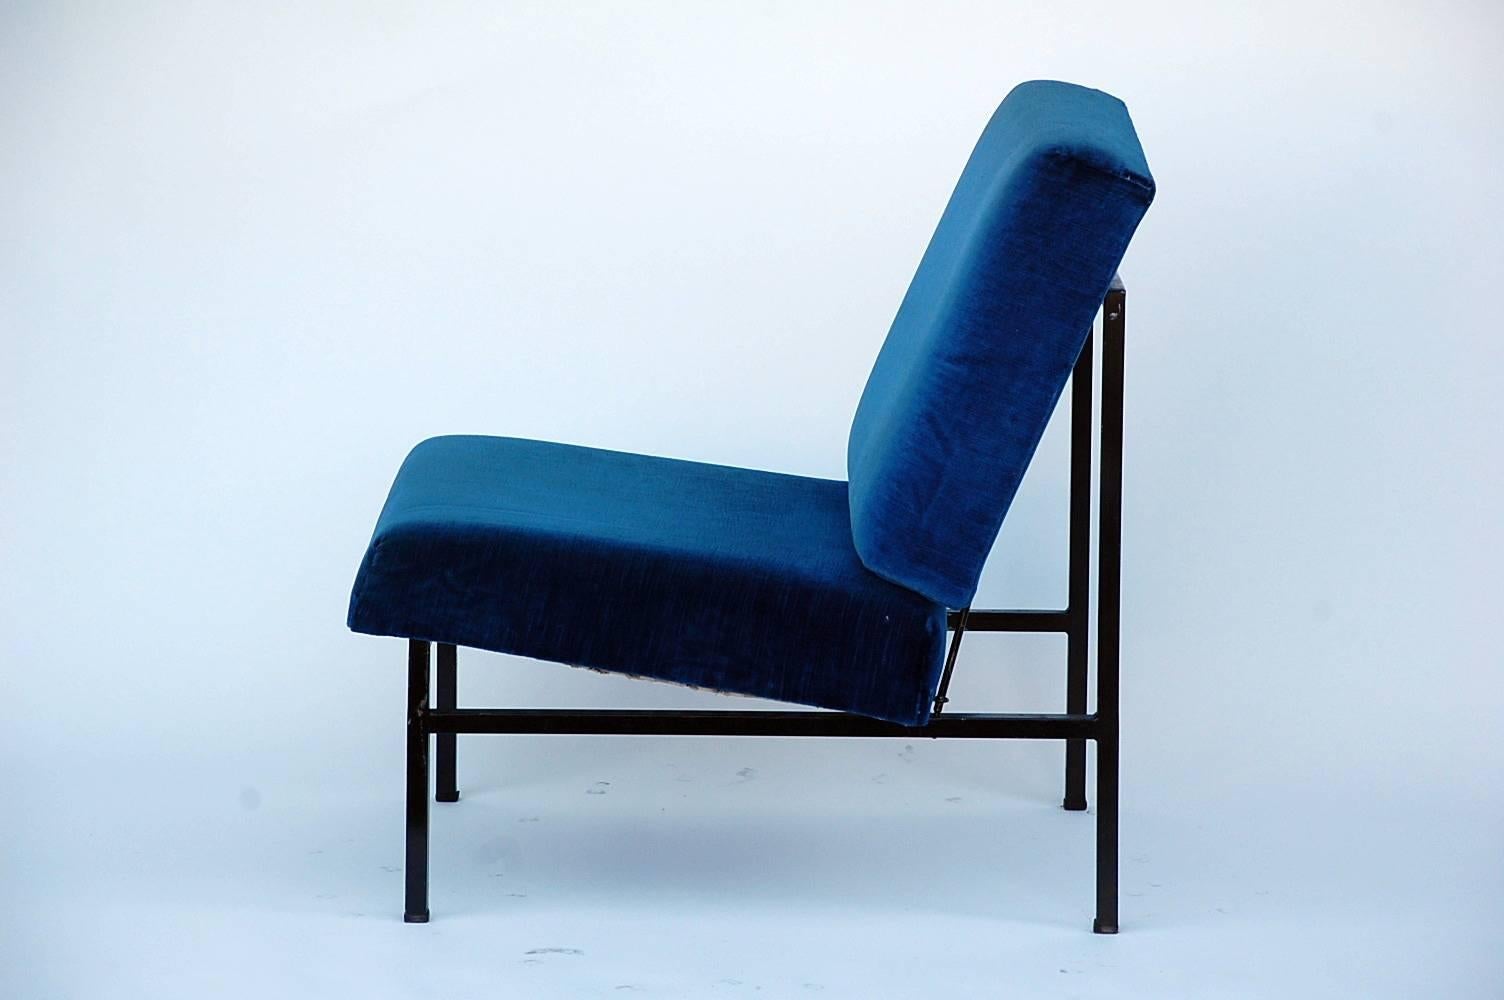 French Pair of 'Déclive' Velvet and Blackened Steel Slipper Chairs by Design Frères For Sale